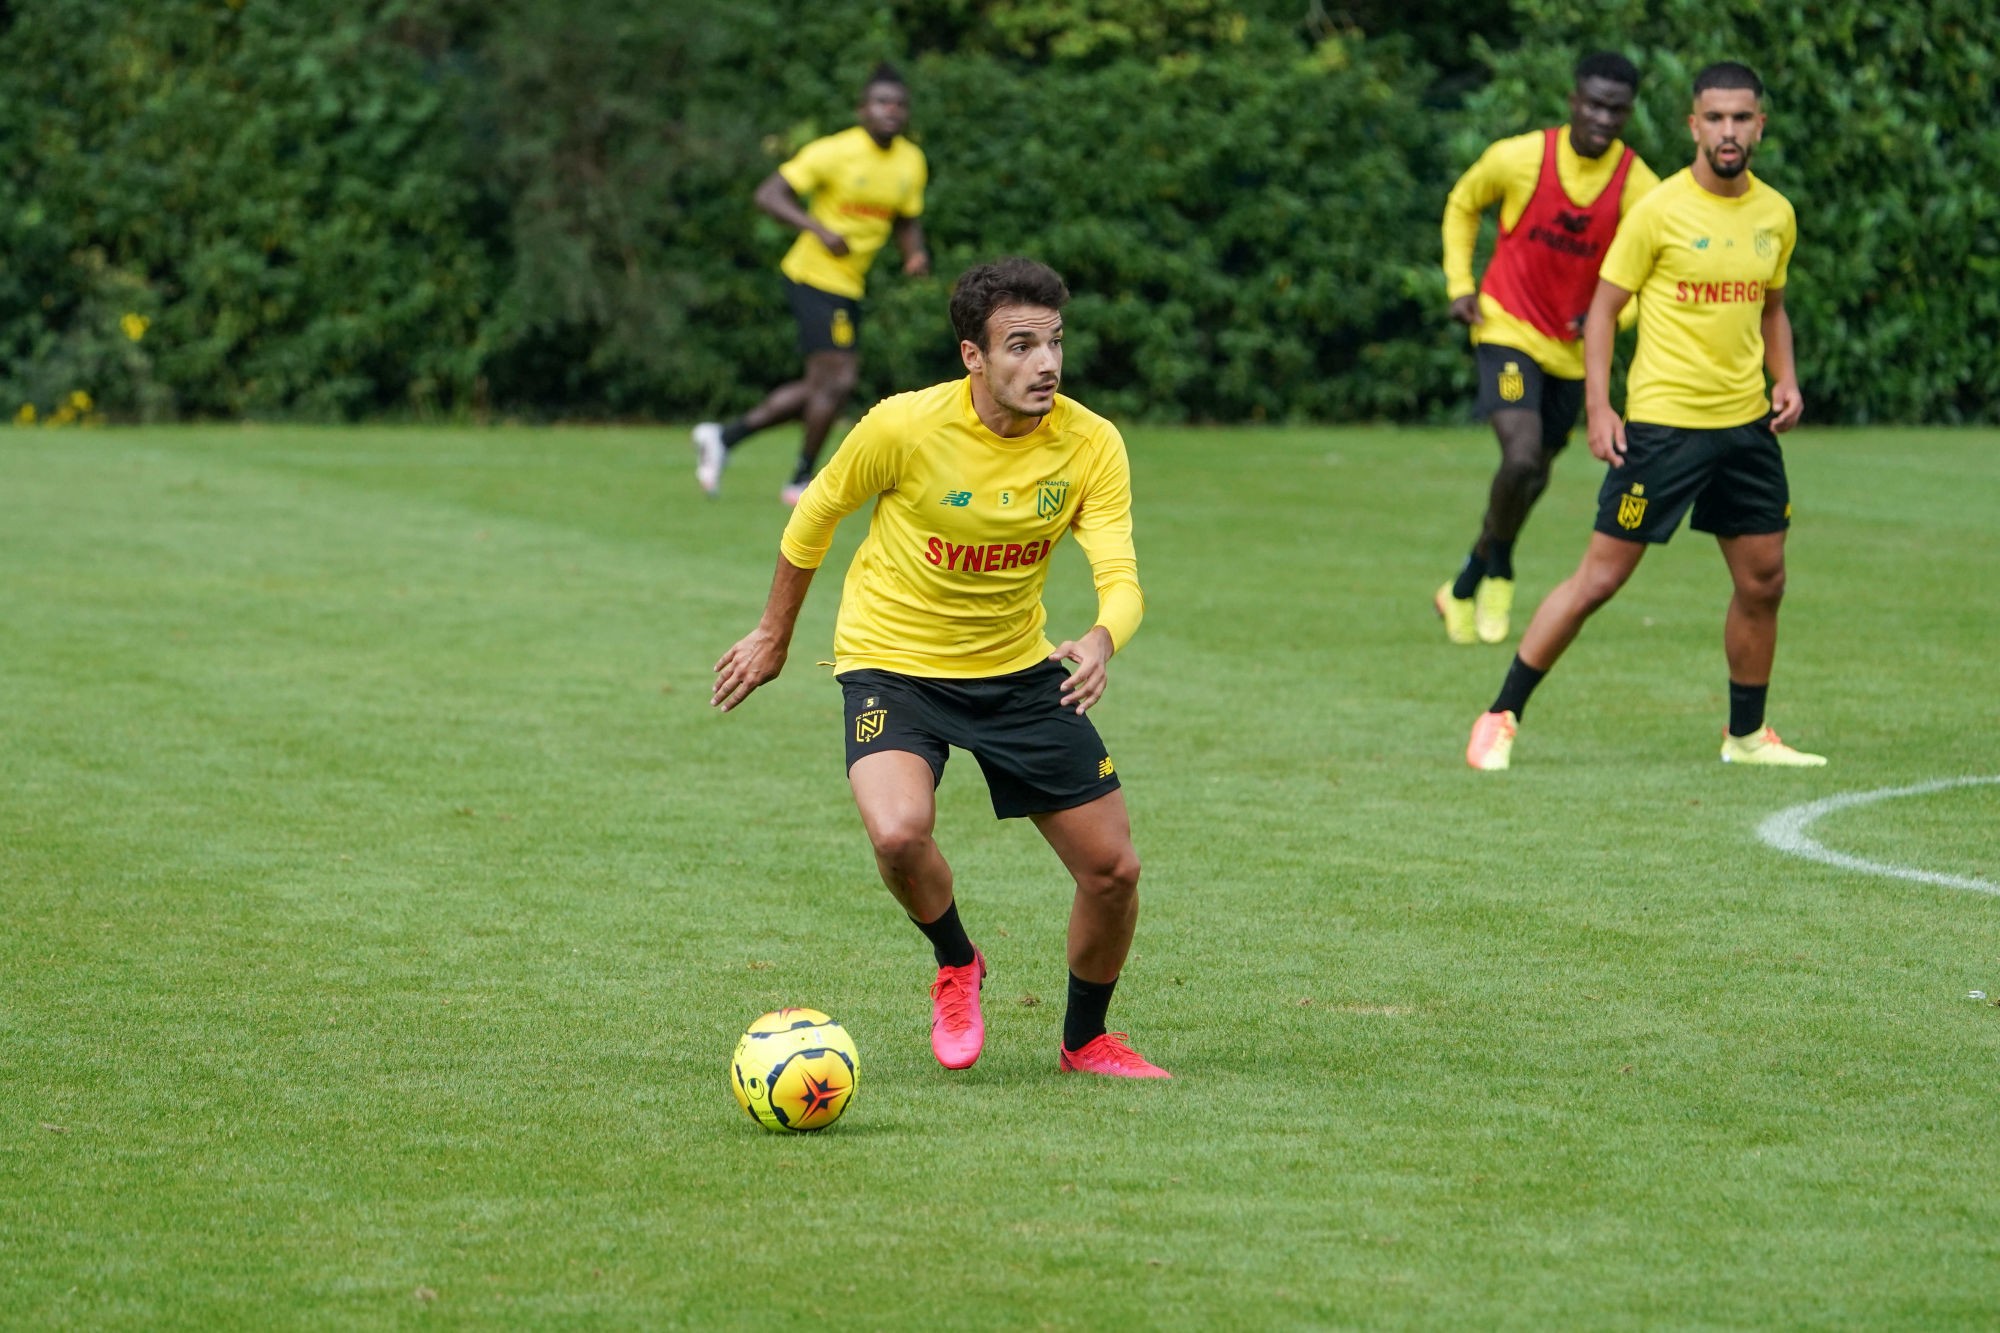 Pedro CHIRIVELLA  of Nantes during training session of FC Nantes on July 2, 2020 in Nantes, France. (Photo by Eddy Lemaistre/Icon Sport) - Stade de La Beaujoire - Louis Fonteneau - Nantes (France)